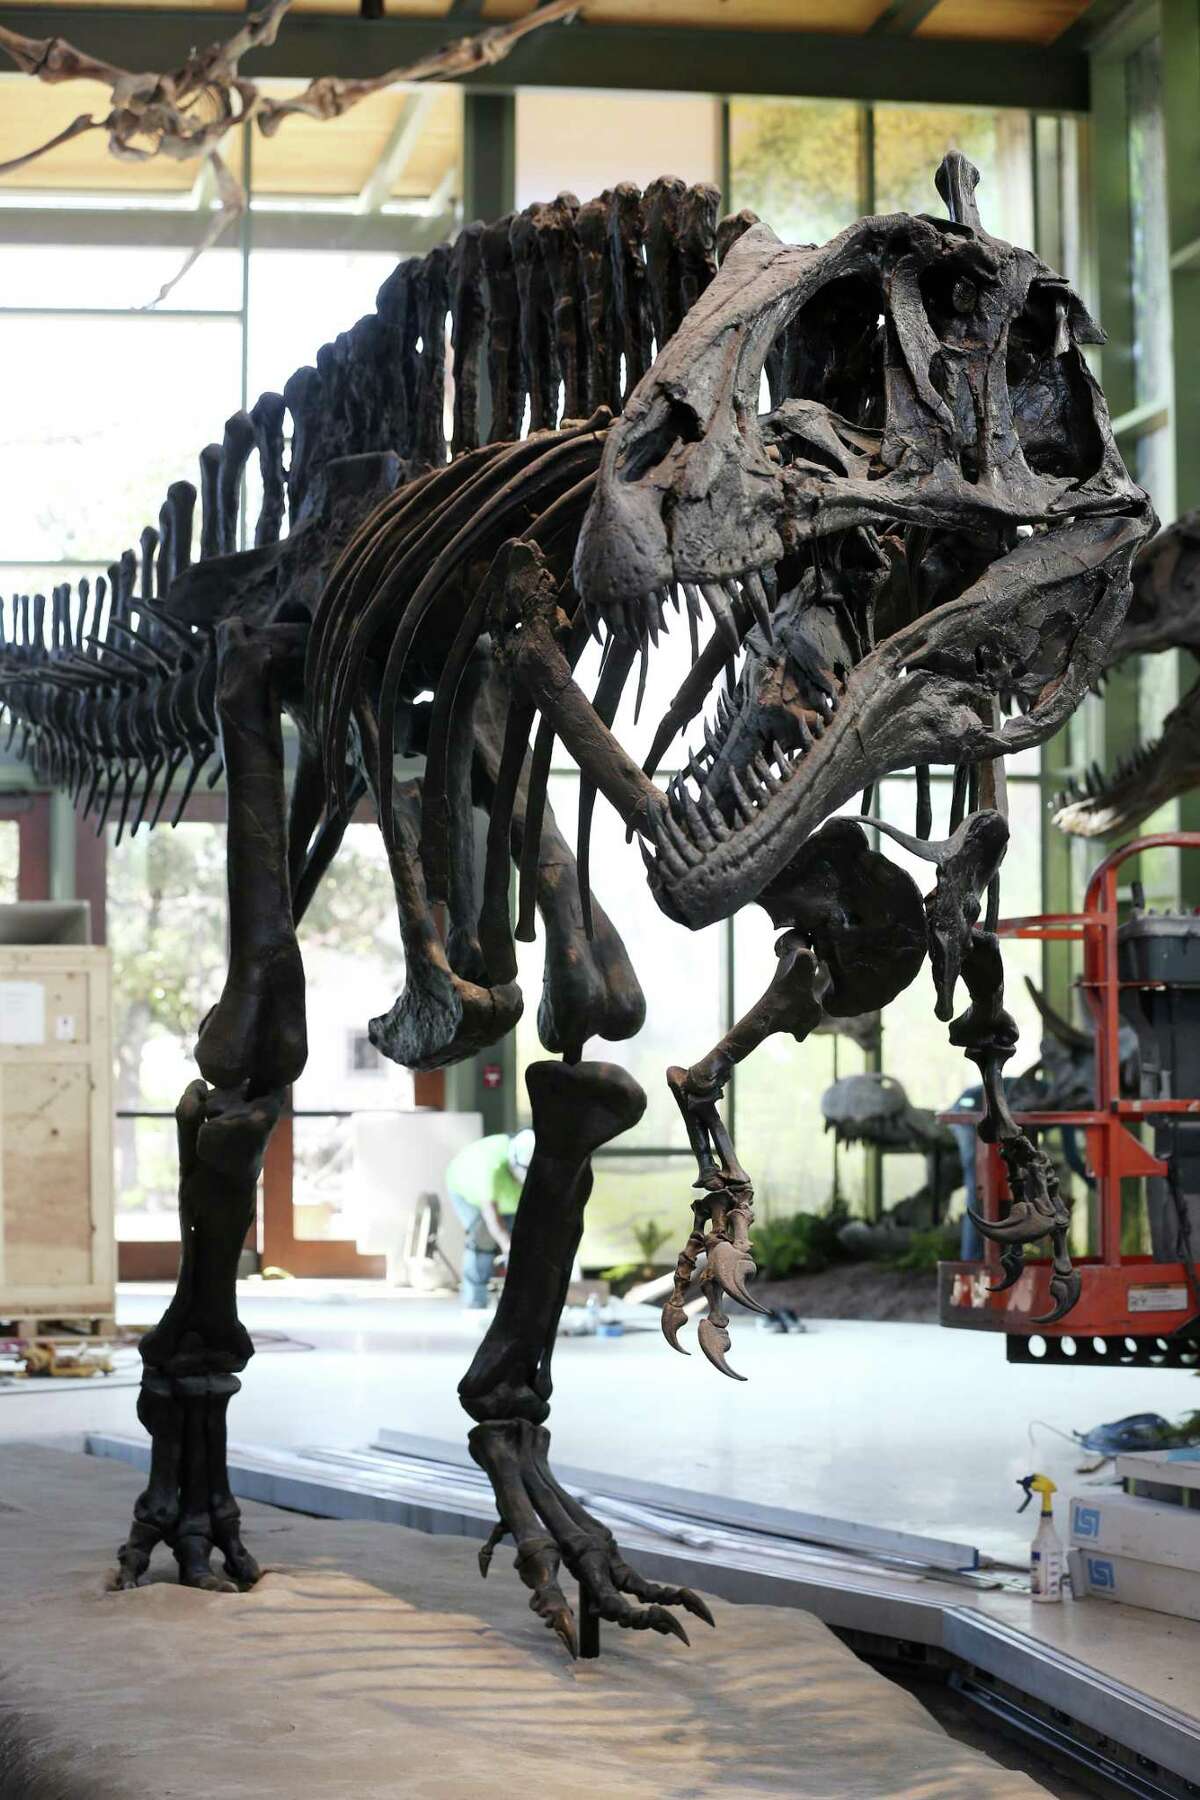 The Acrocanthosaurus is one of the exhibits in the Naylor Family Dinosaur Gallery and Dinosaur Lab at the Witte Museum.Footprints of the flesh-eating dinosaur were found in Government Canyon State Natural Area.